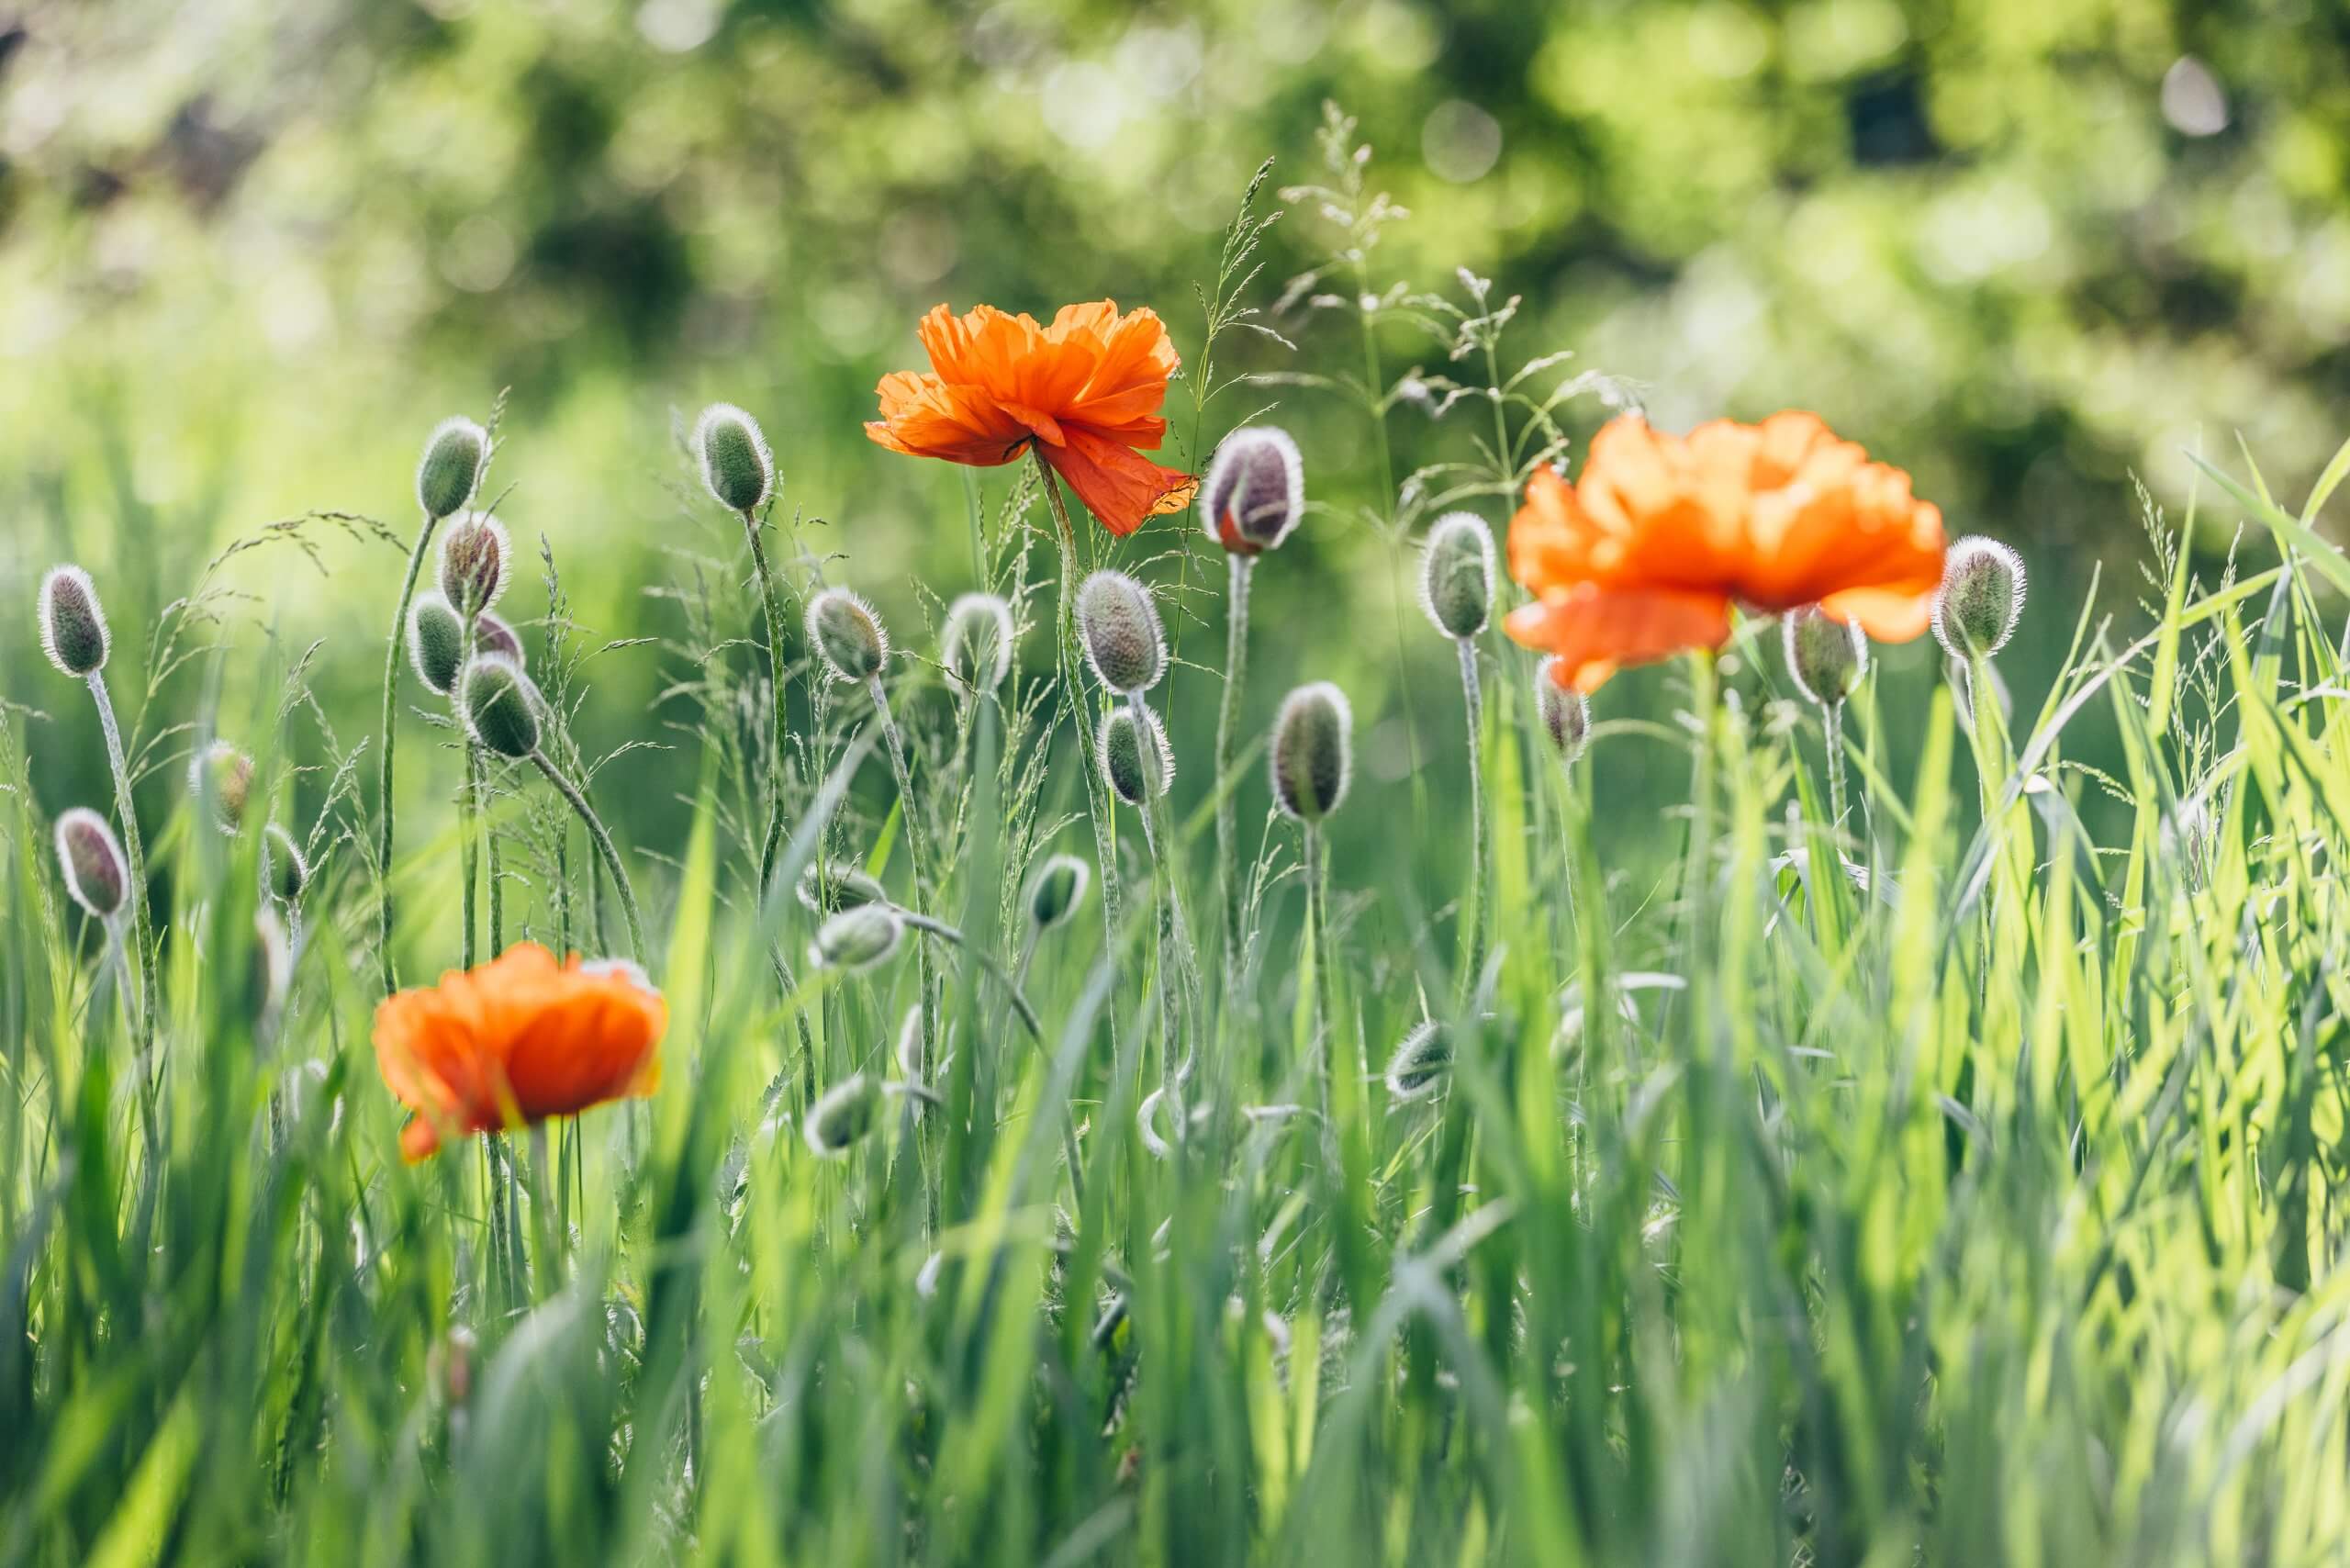 close up of orange flowers in a field of grass